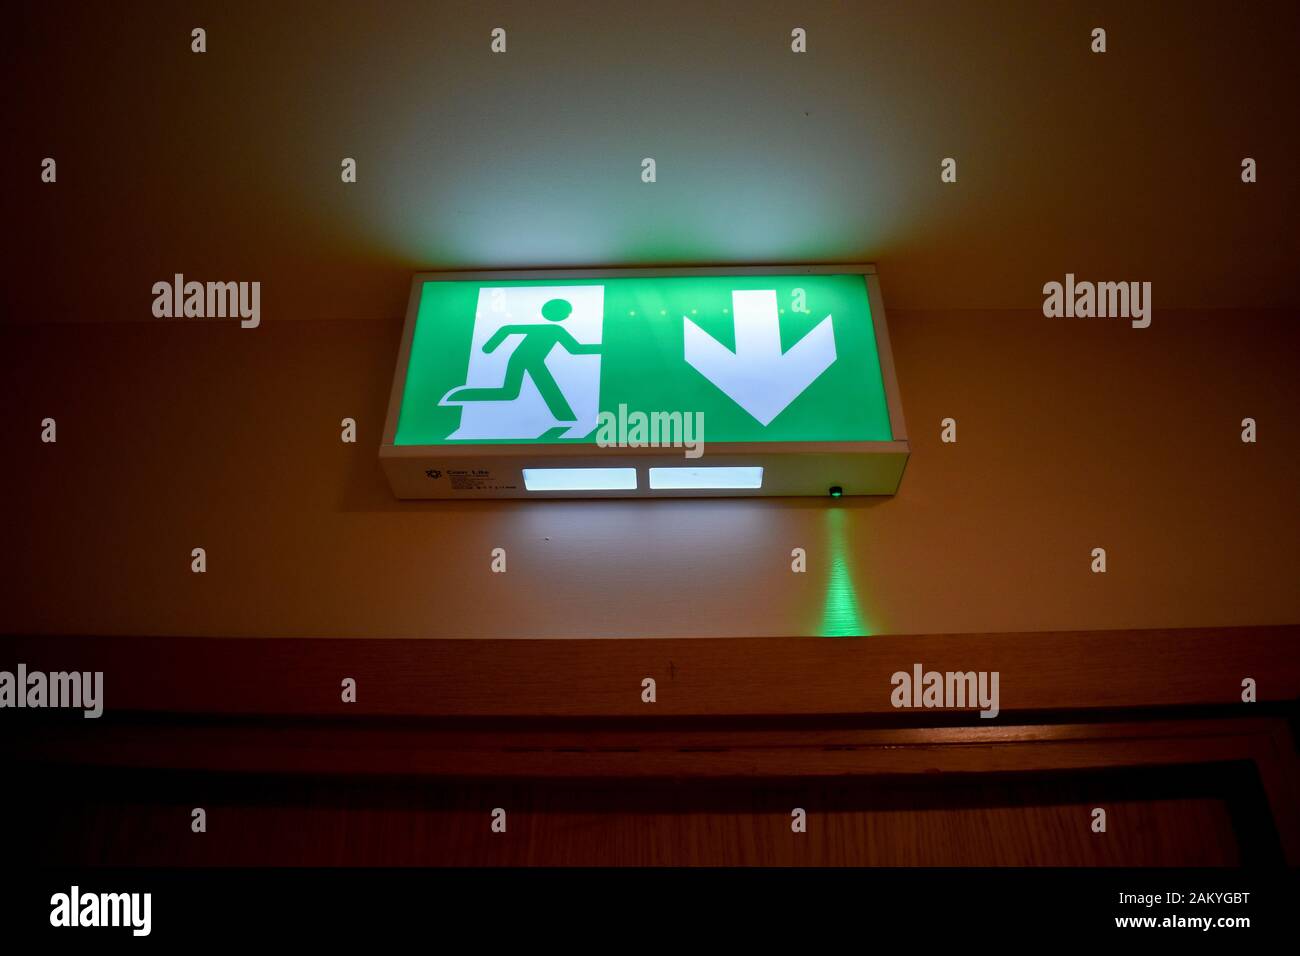 An escape exit sign in a residential apartment building Stock Photo